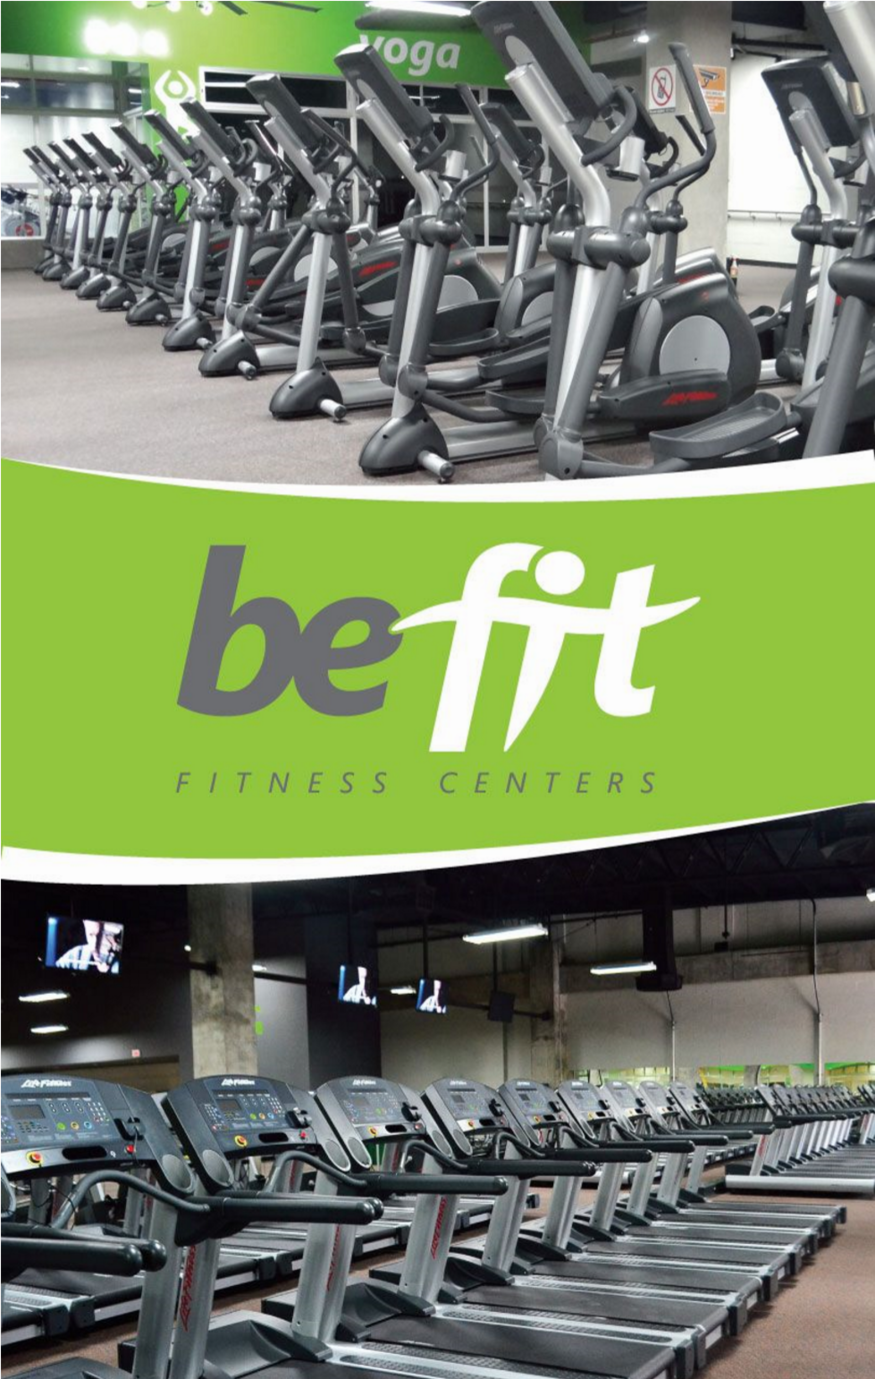 Be Fit equipment and logo